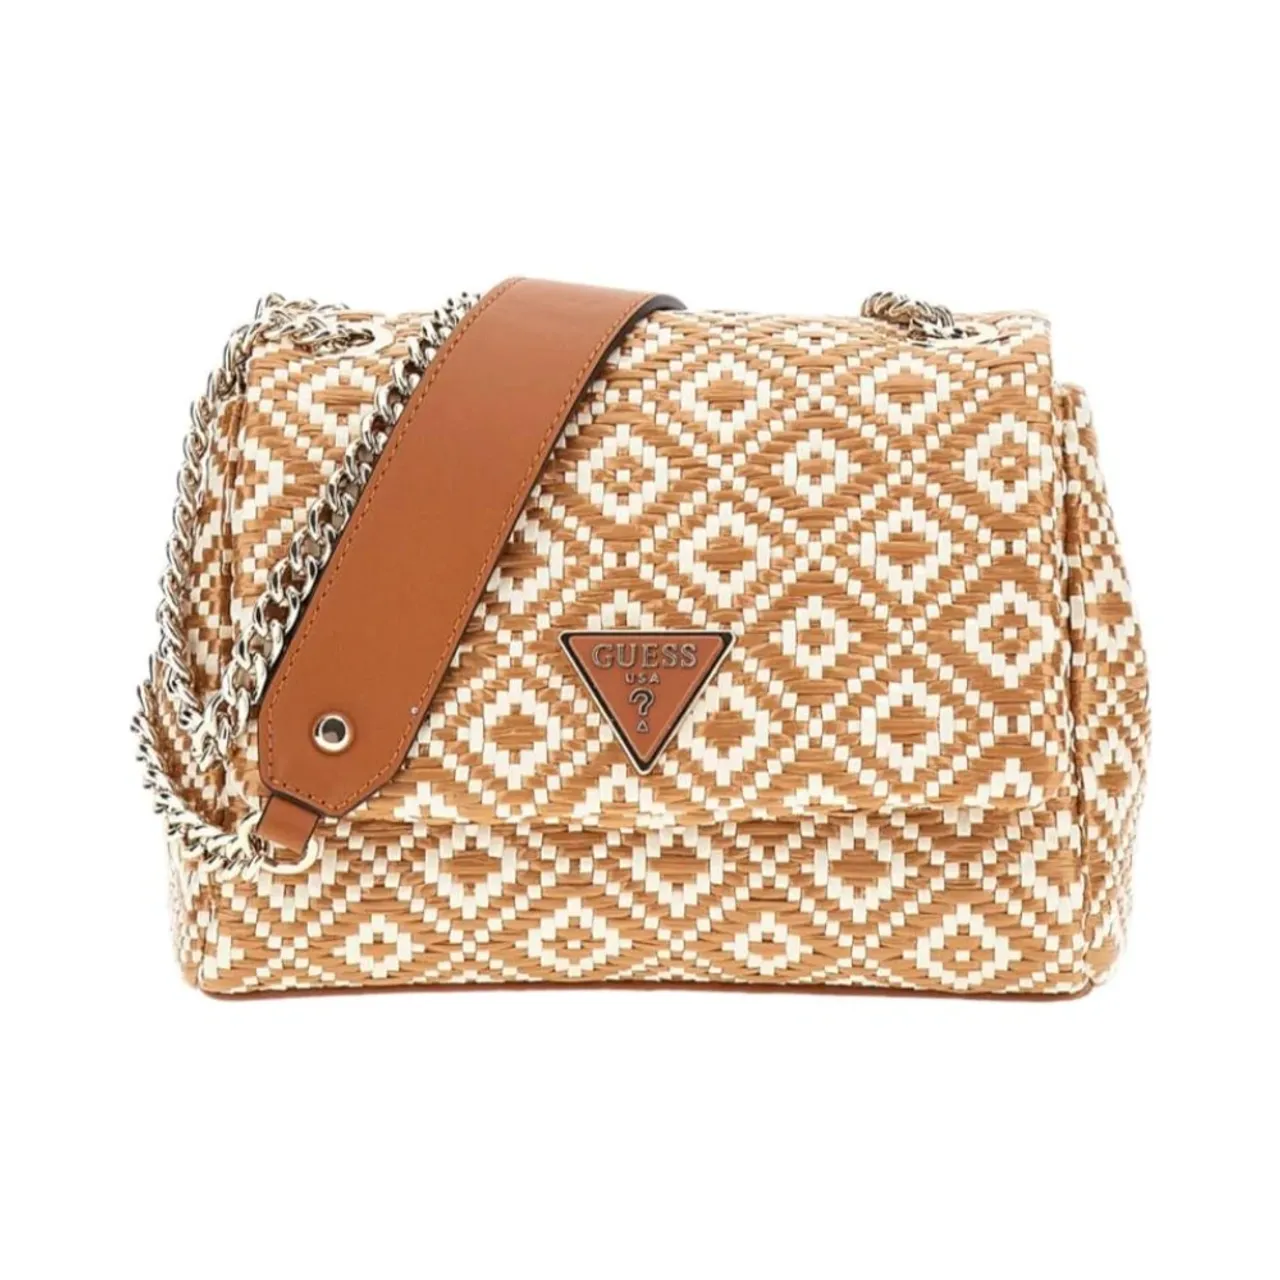 Bag Accessories Guess